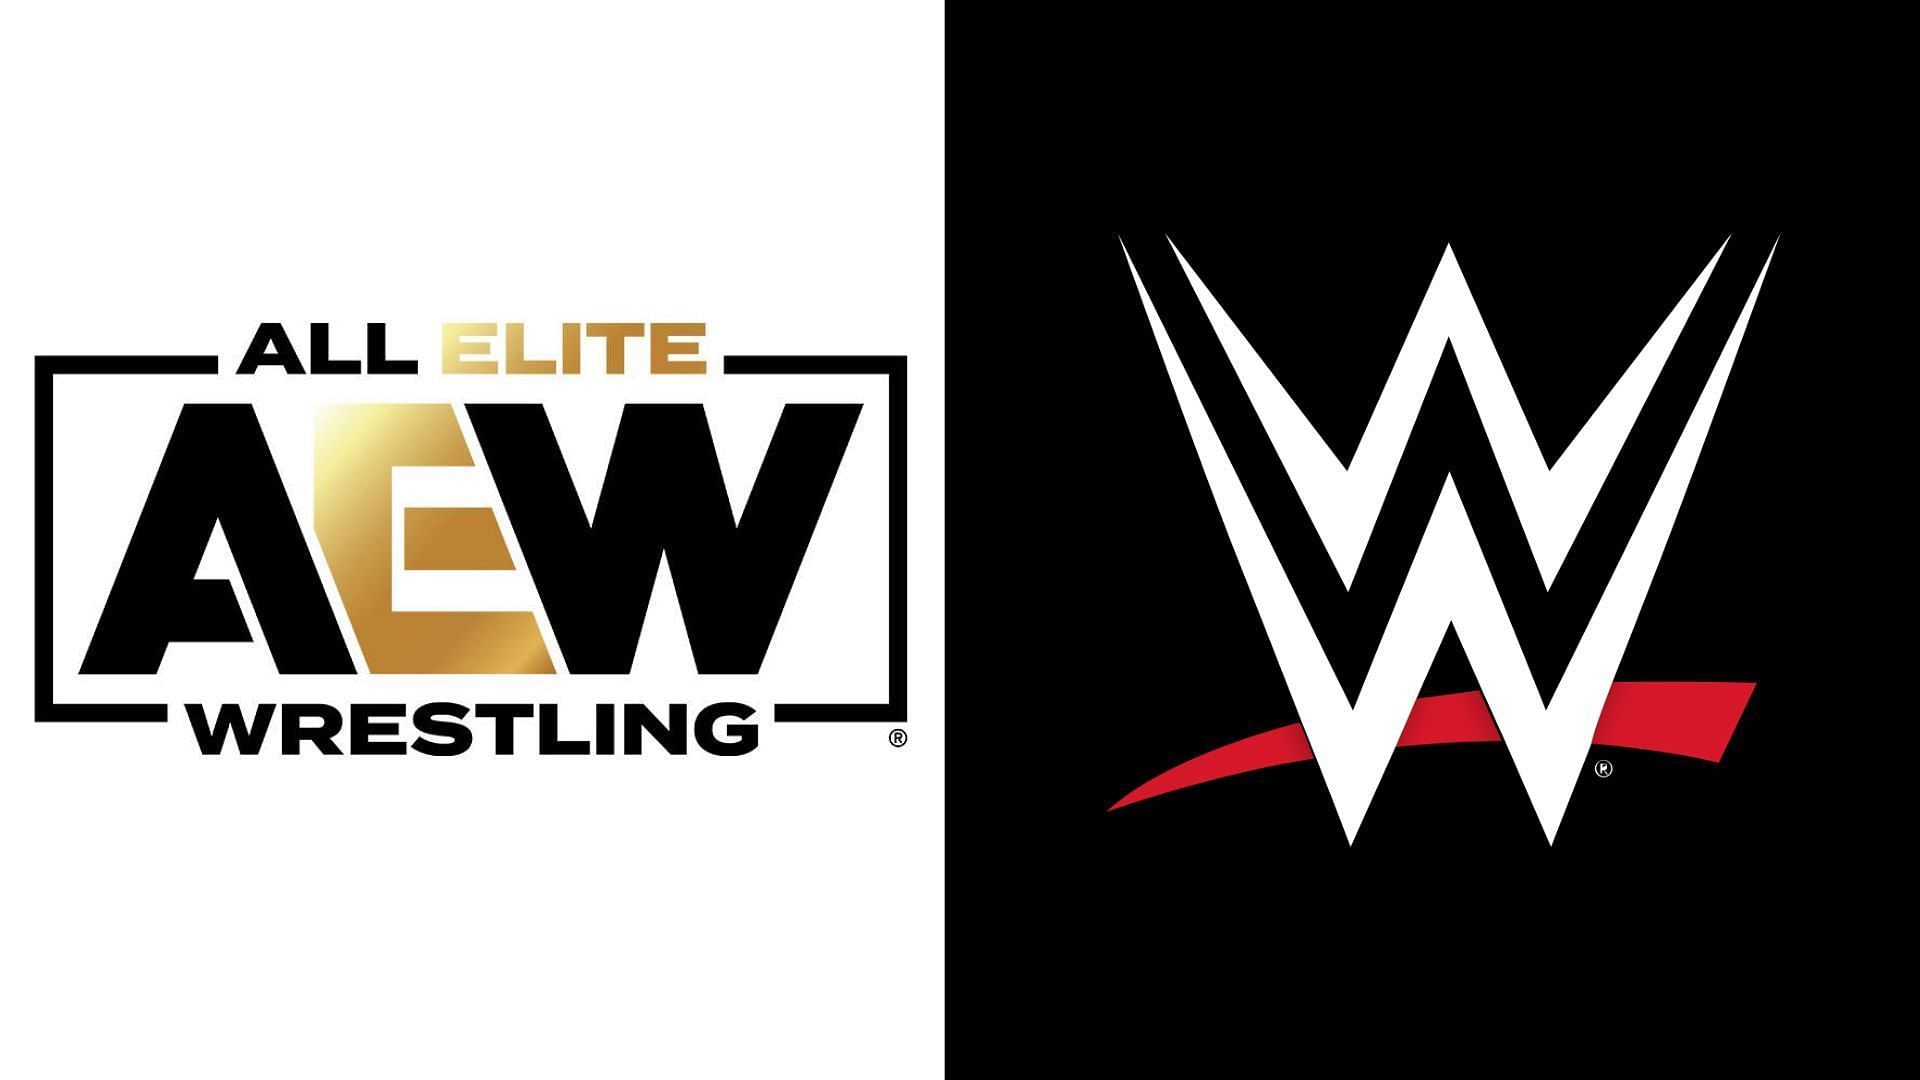 AEW and WWE are mega-players in the wrestling industry. [Photos courtesy of their respective Twitter accounts]